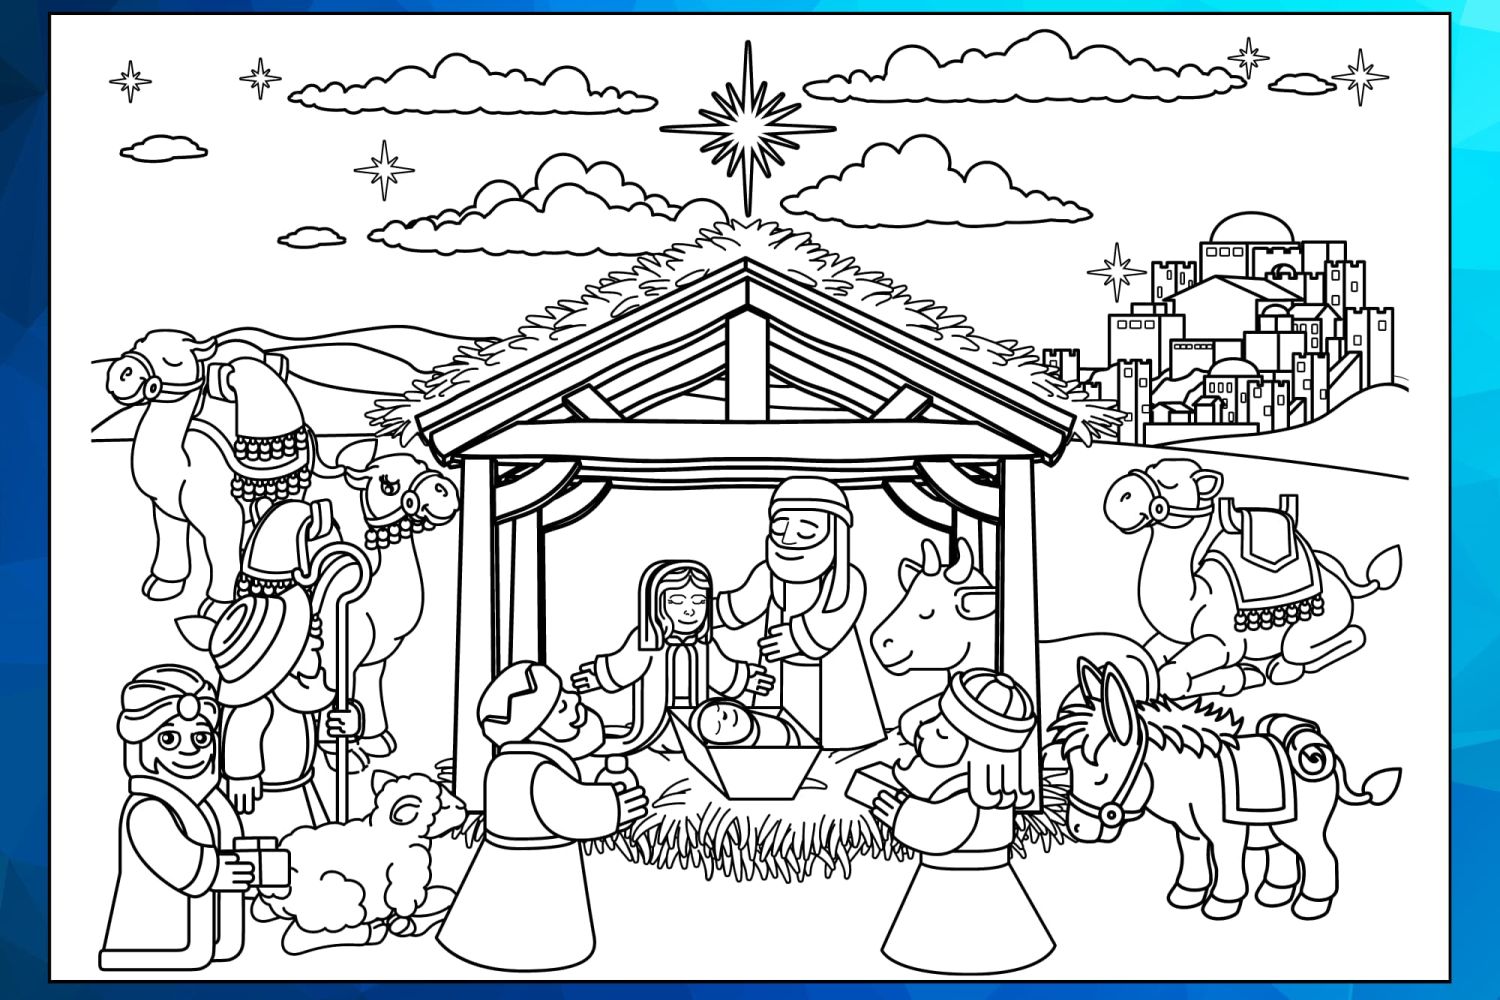 Nativity%20Scene%20Christmas%20Coloring%20Pages%20Worksheet%201-175b3fa4 Peace